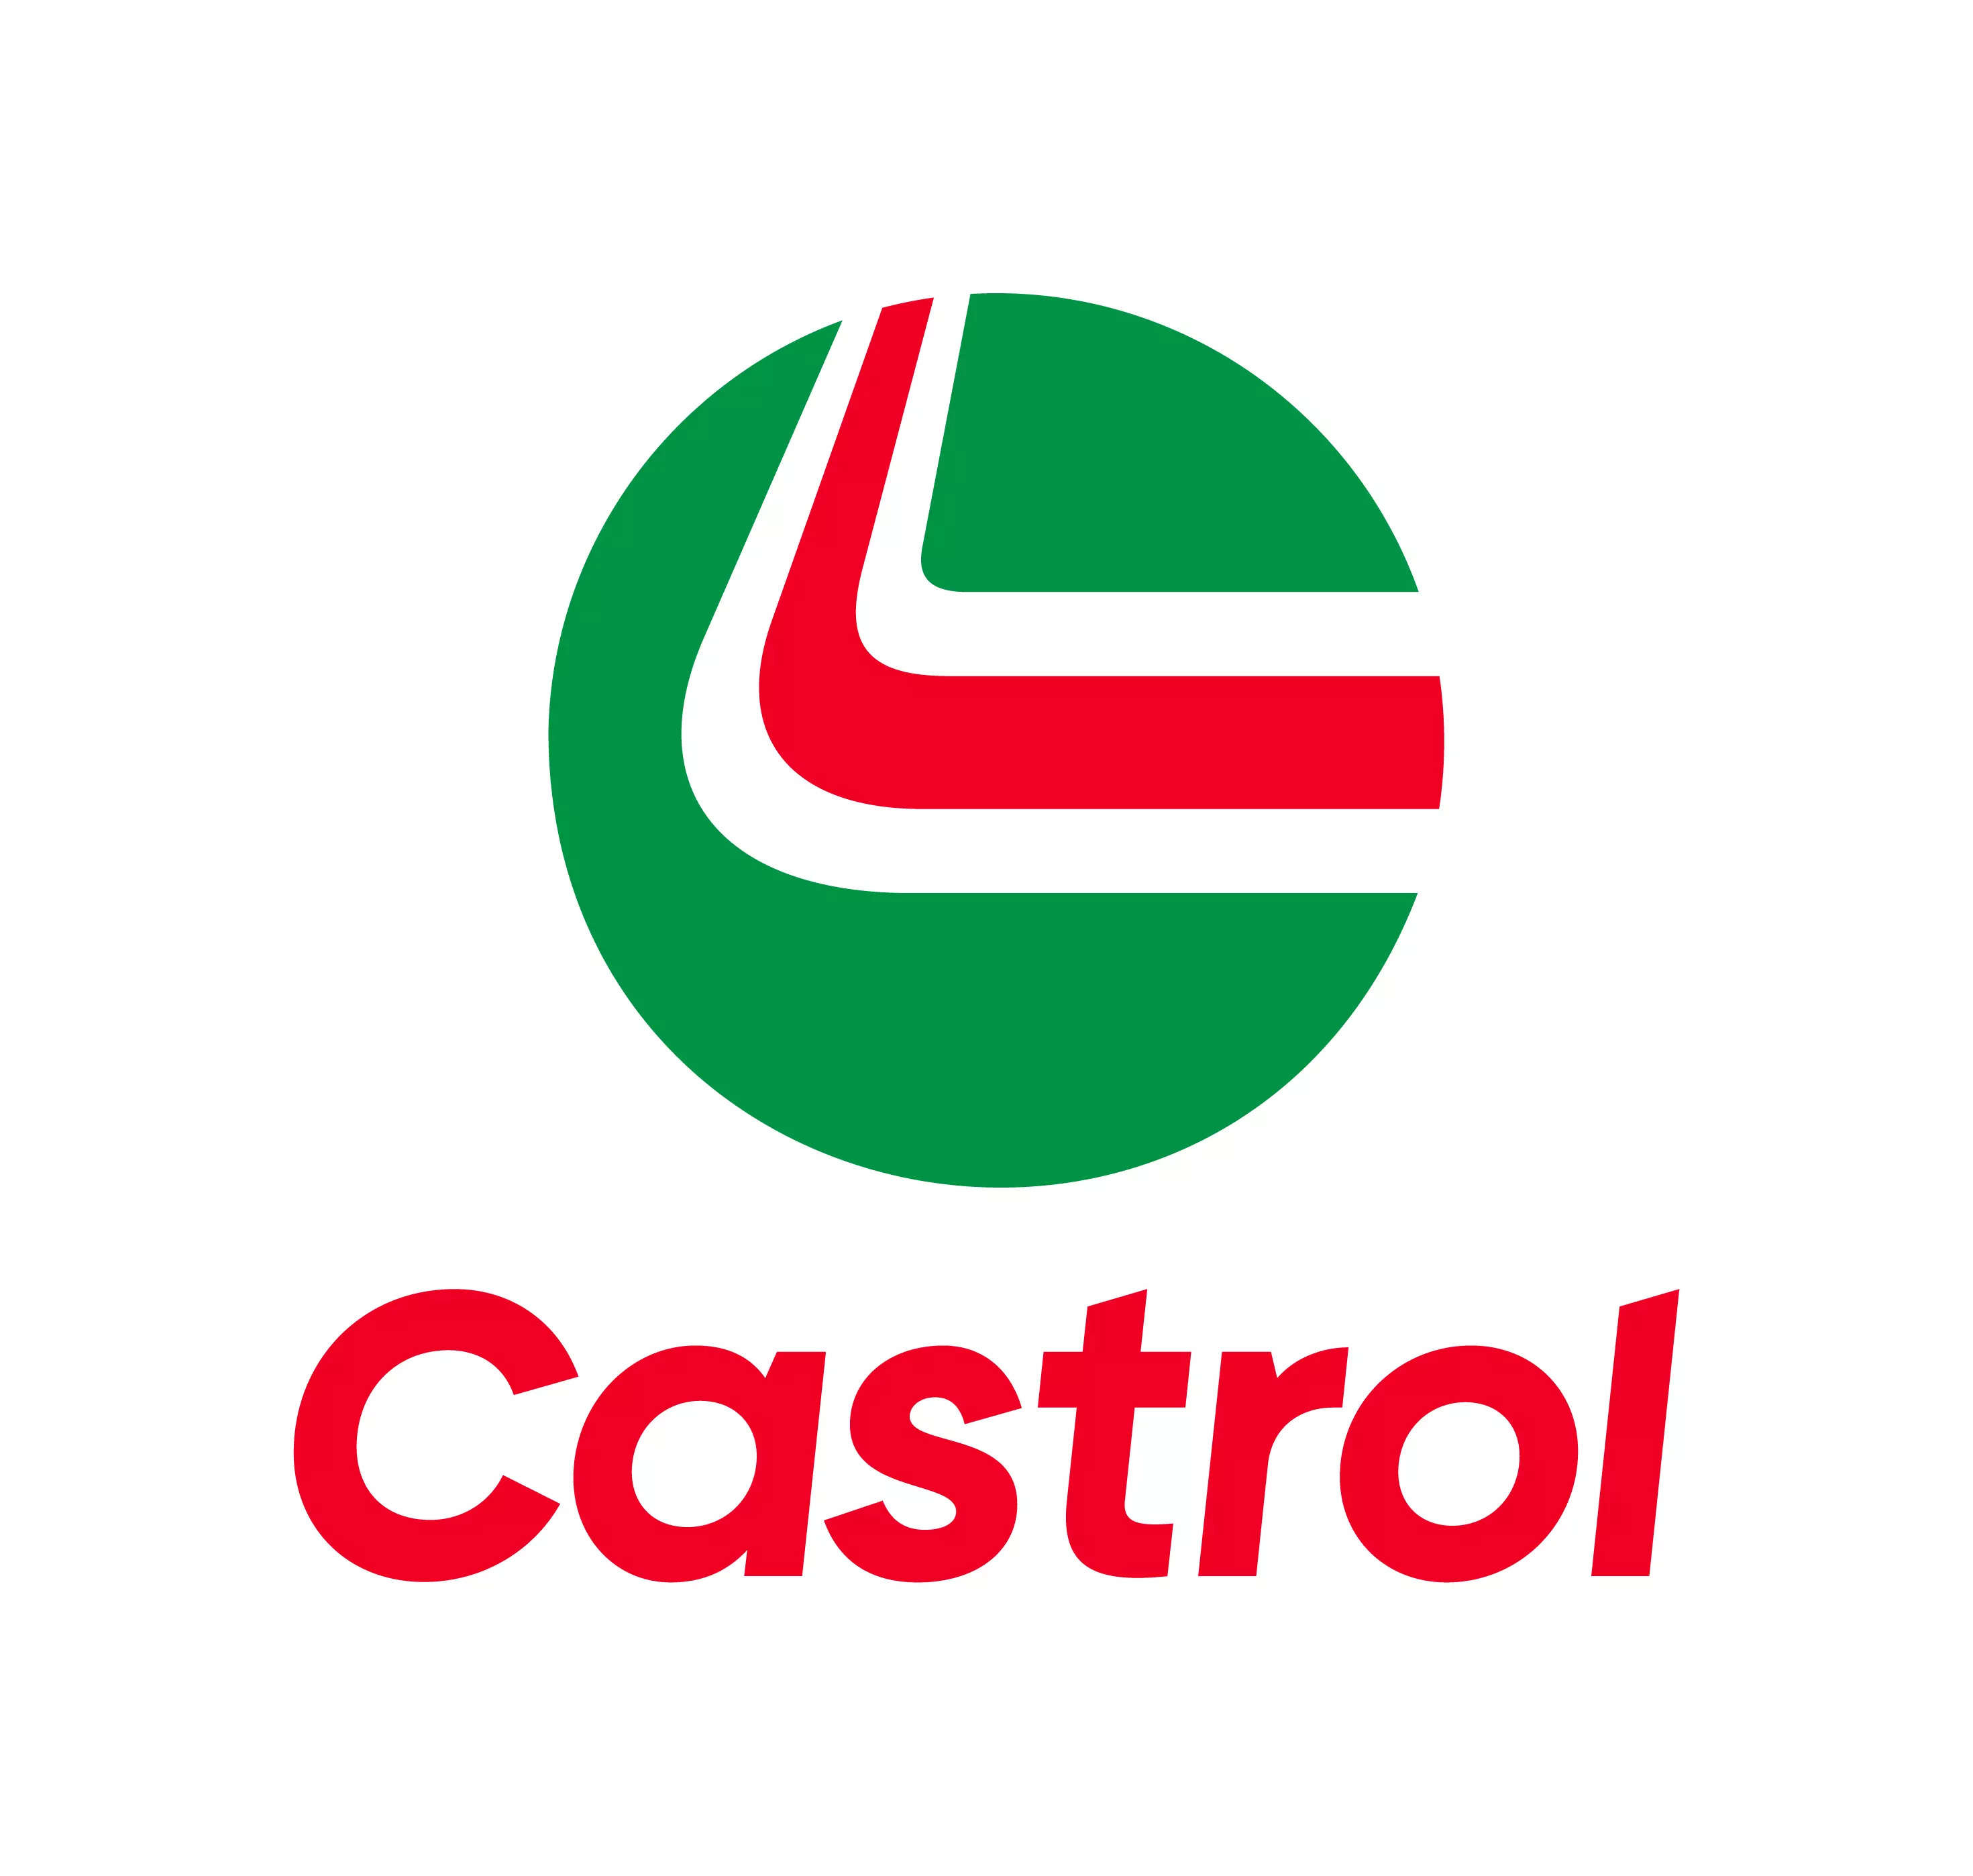 Castrol Oil Wreath Style Waterslide Transfer Decal 1958 1968 And 1968 2002 Lupon gov ph